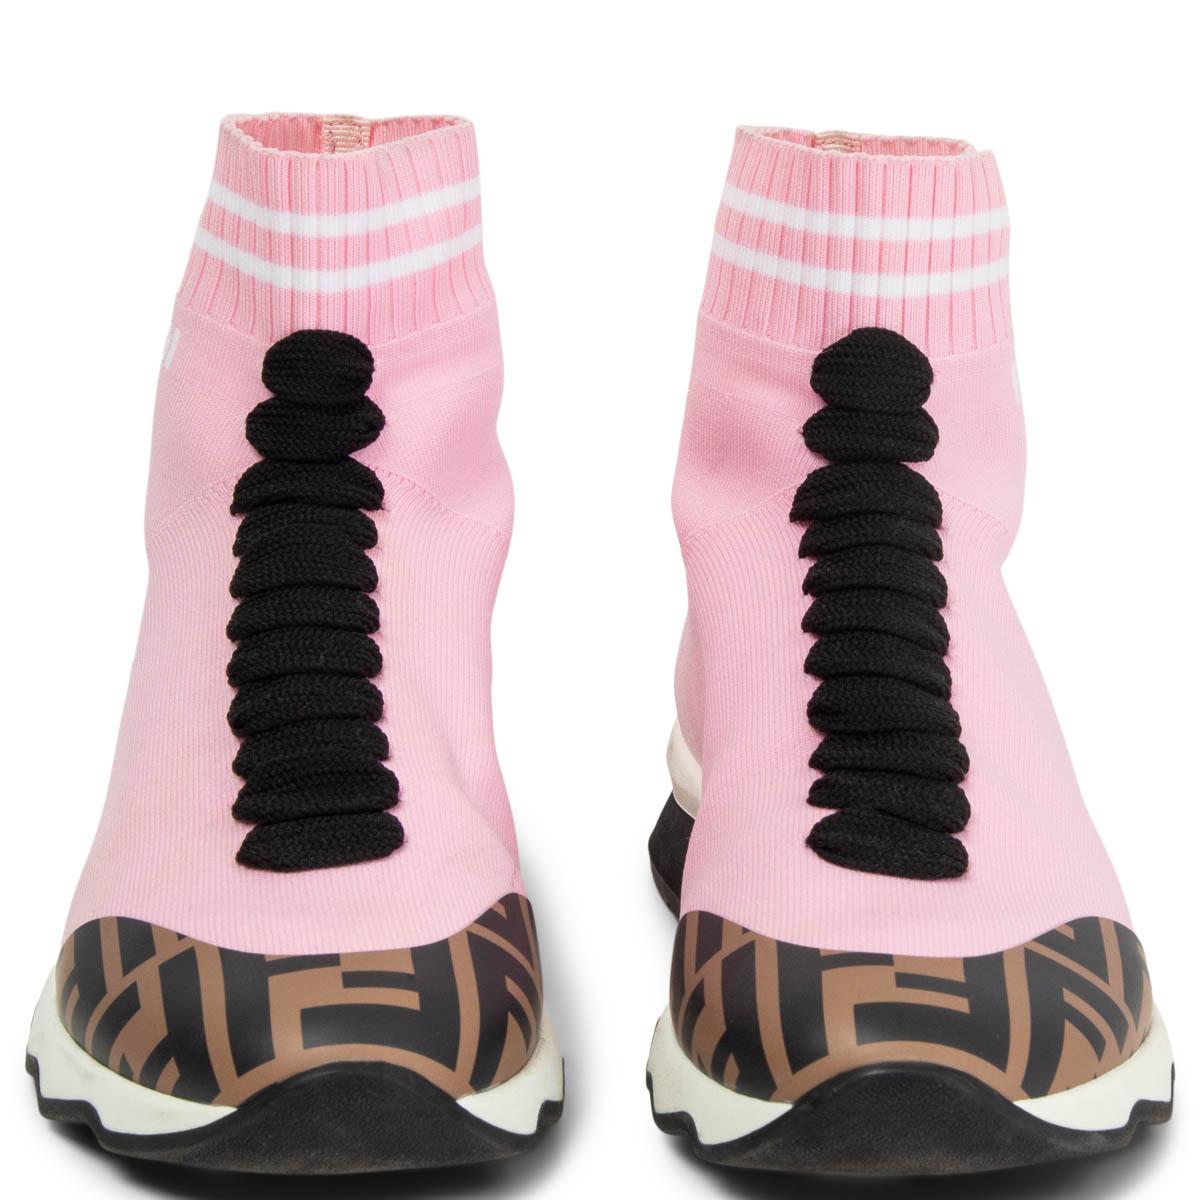 100% authentic Fendi sock sneakers in bubble gum pink stretchy fabric featuring black faux lace detail and brown and black logo cap. Rubber sole. Have been worn and are in excellent condition. 

Measurements
Imprinted Size	36
Shoe Size	36
Inside